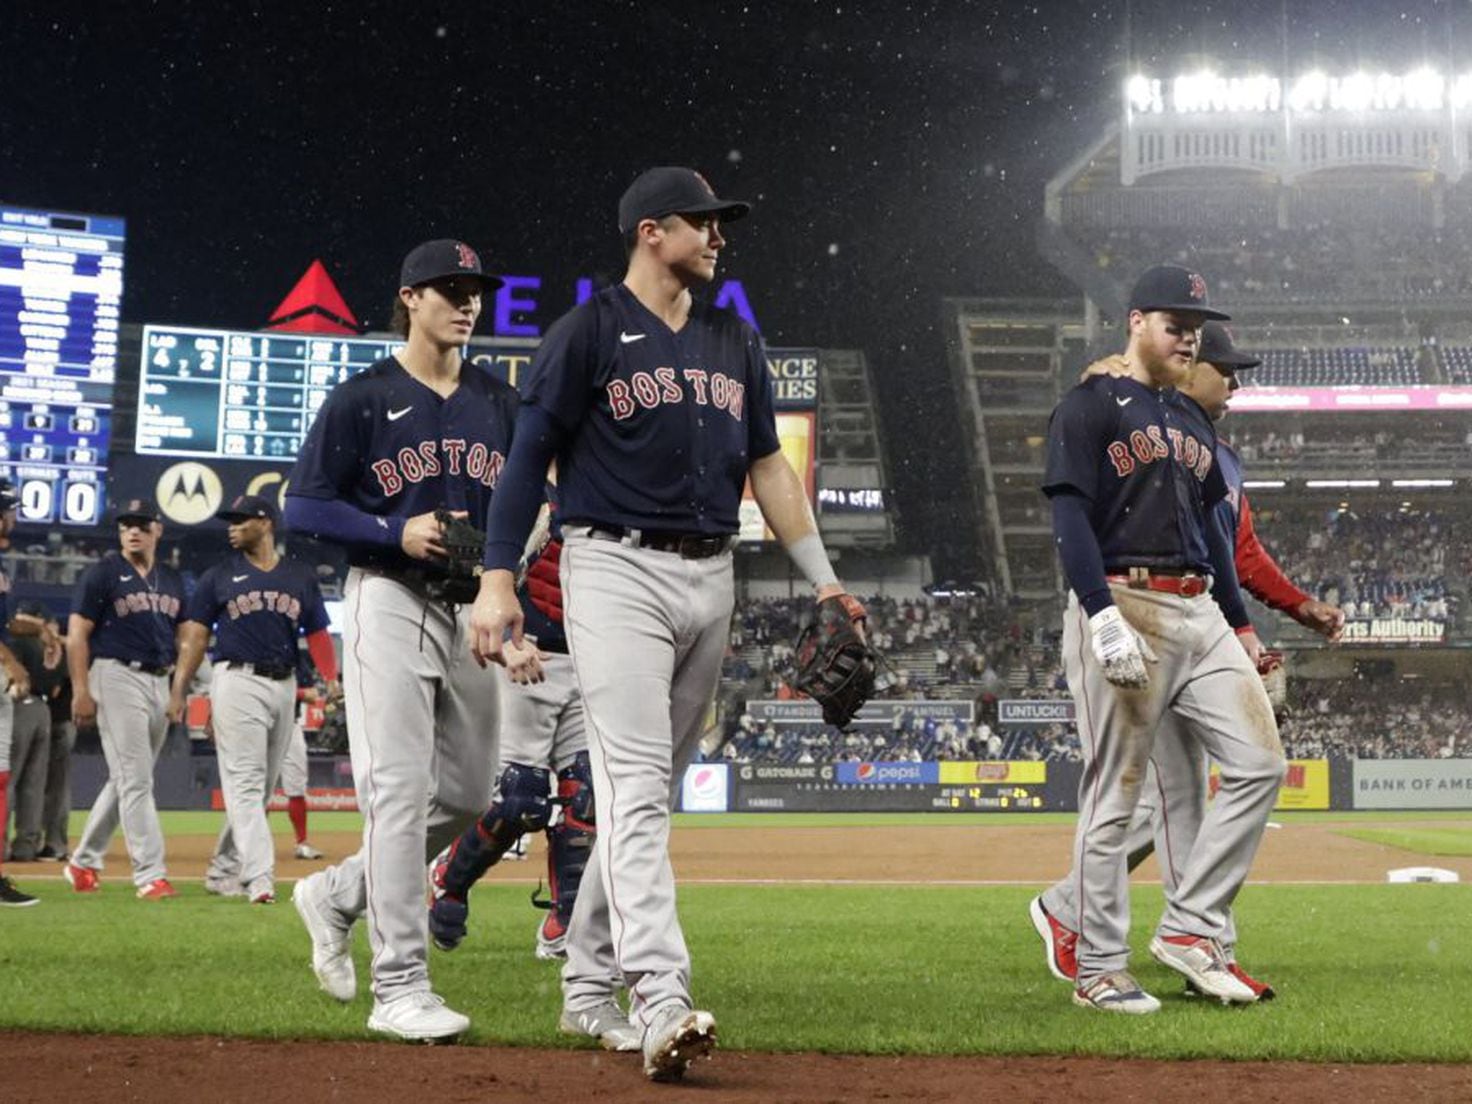 Alex Verdugo comes through twice to lead Red Sox to walk-off win over  Yankees